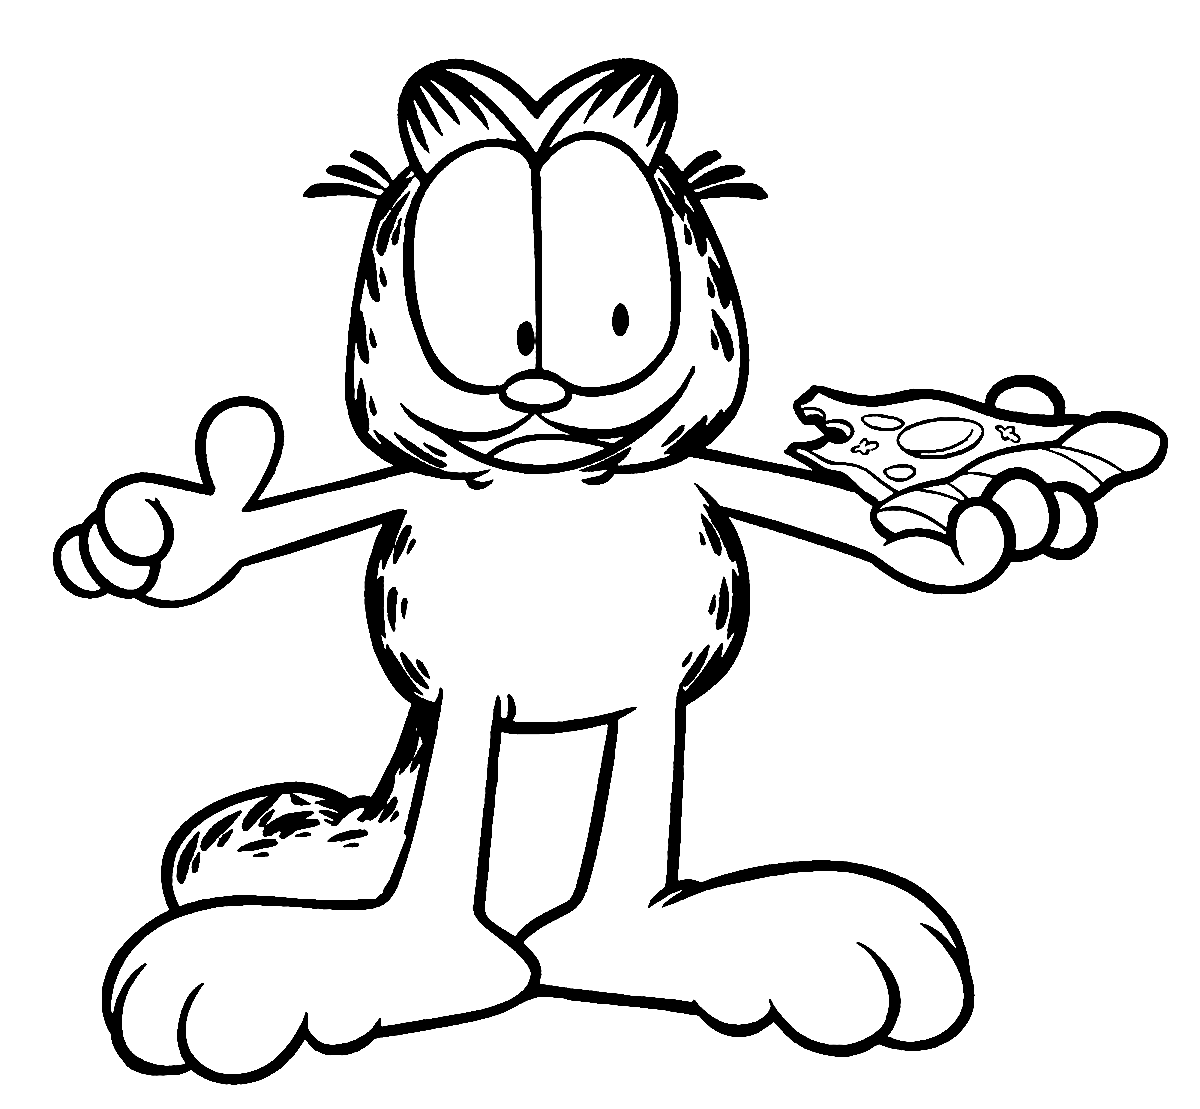 Printable Garfield Coloring Pages: Cute Comic Strip Cat